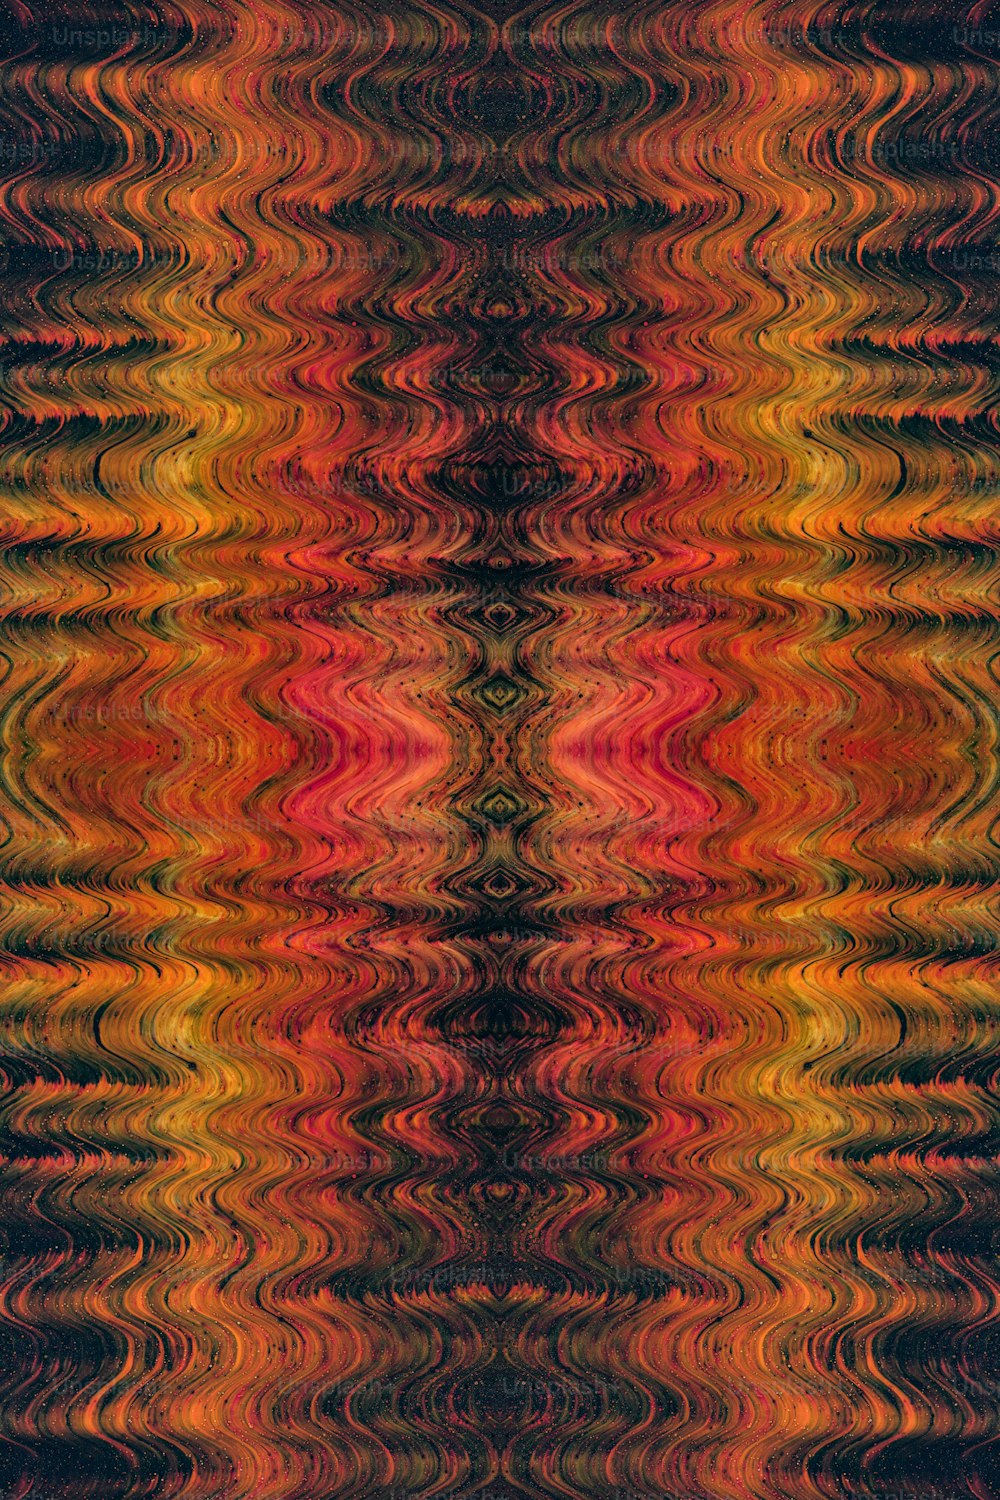 a very colorful pattern that looks like a wave